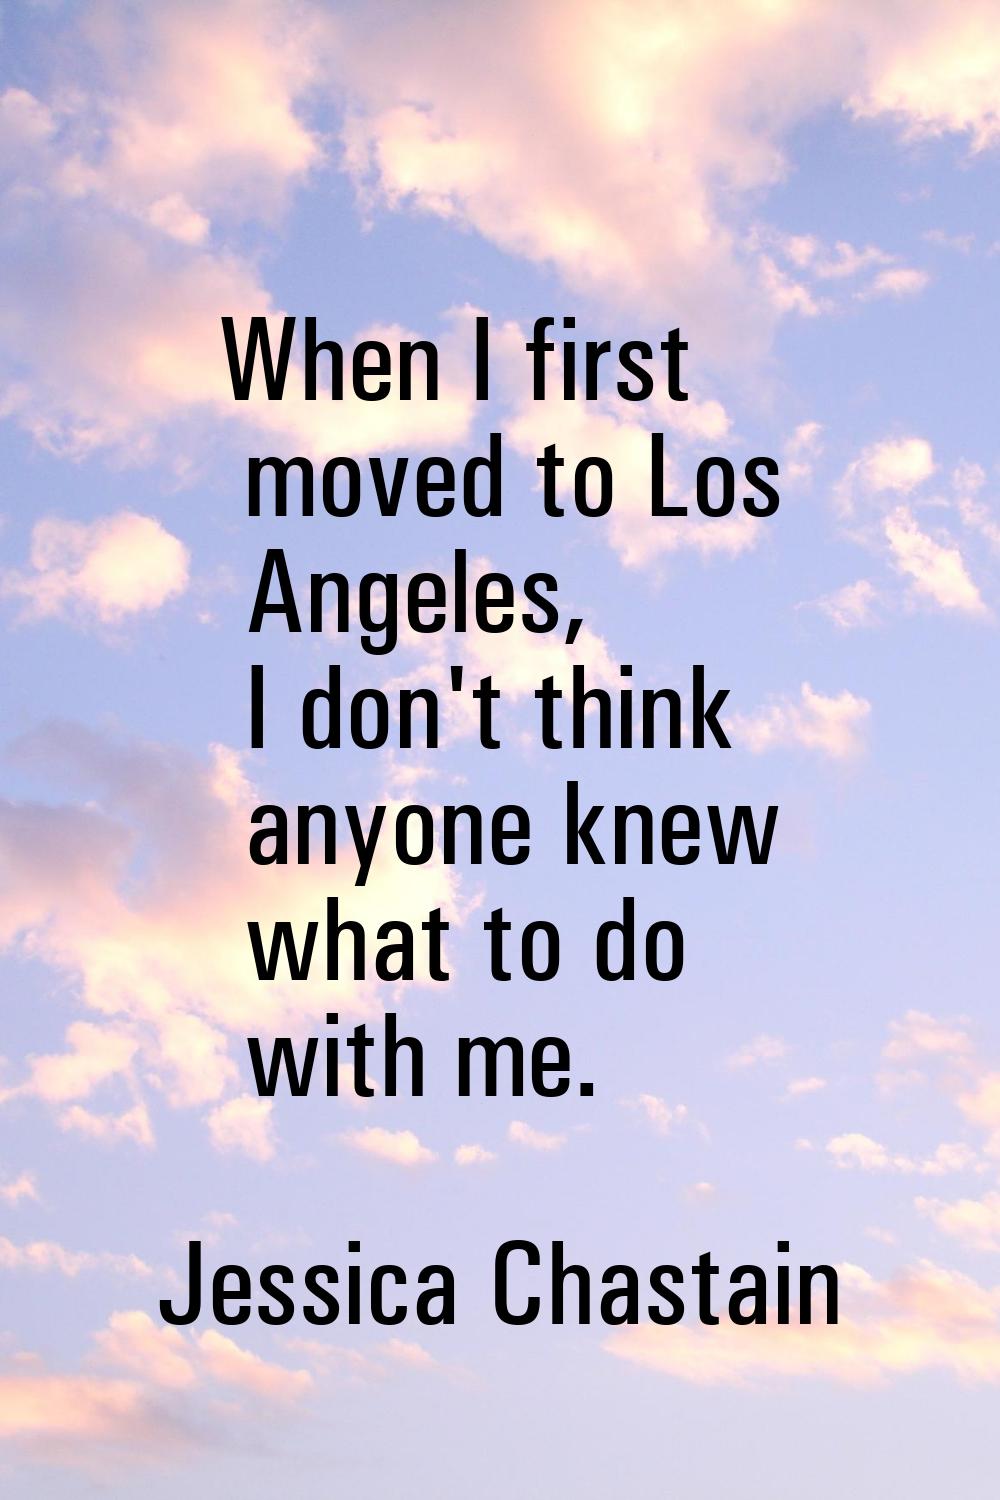 When I first moved to Los Angeles, I don't think anyone knew what to do with me.